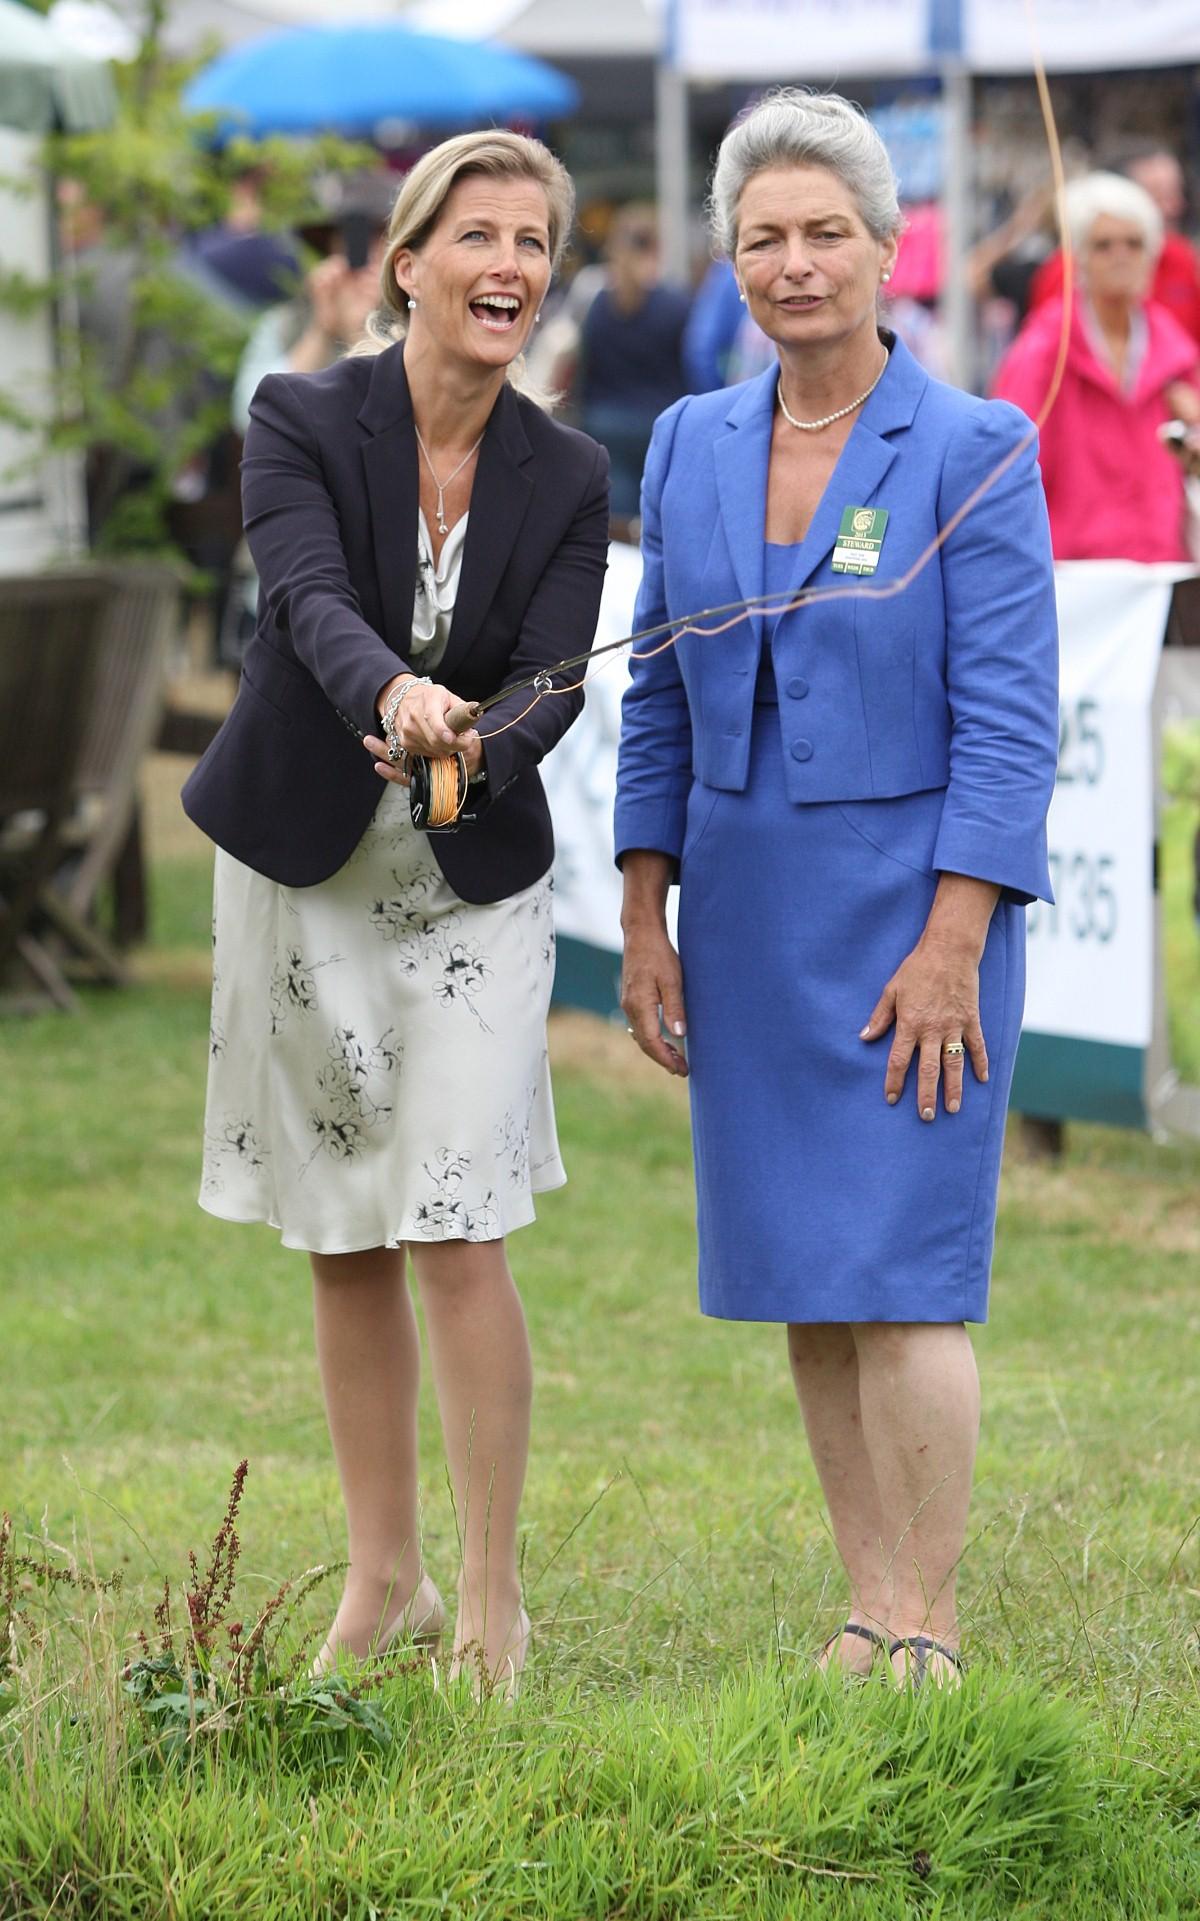 The Year in Pictures - 2013 - The Earl and Countess of Wessex visited the New Forest and Hampshire Country Show. August 2, 2013.